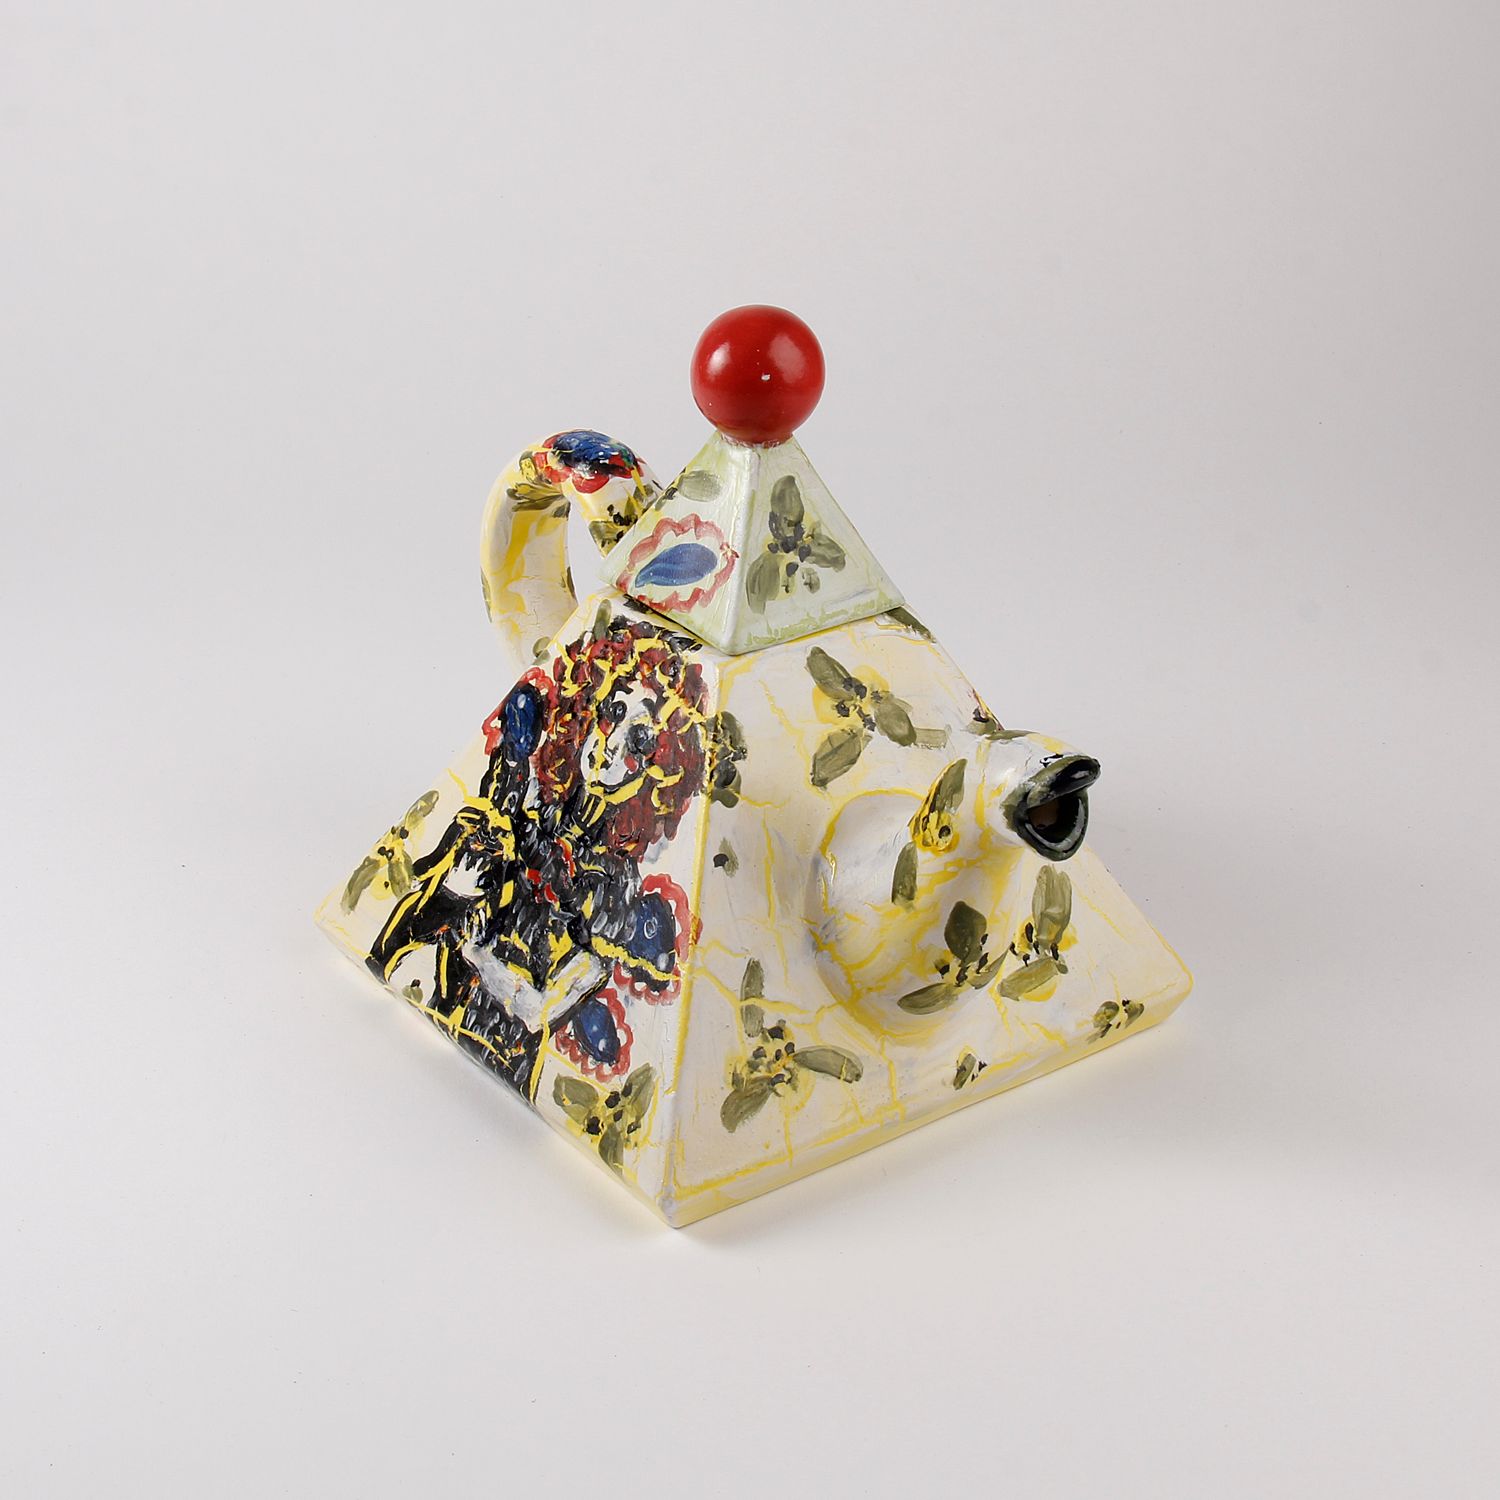 Patricia Lazar: Triangle Teapot Product Image 4 of 4